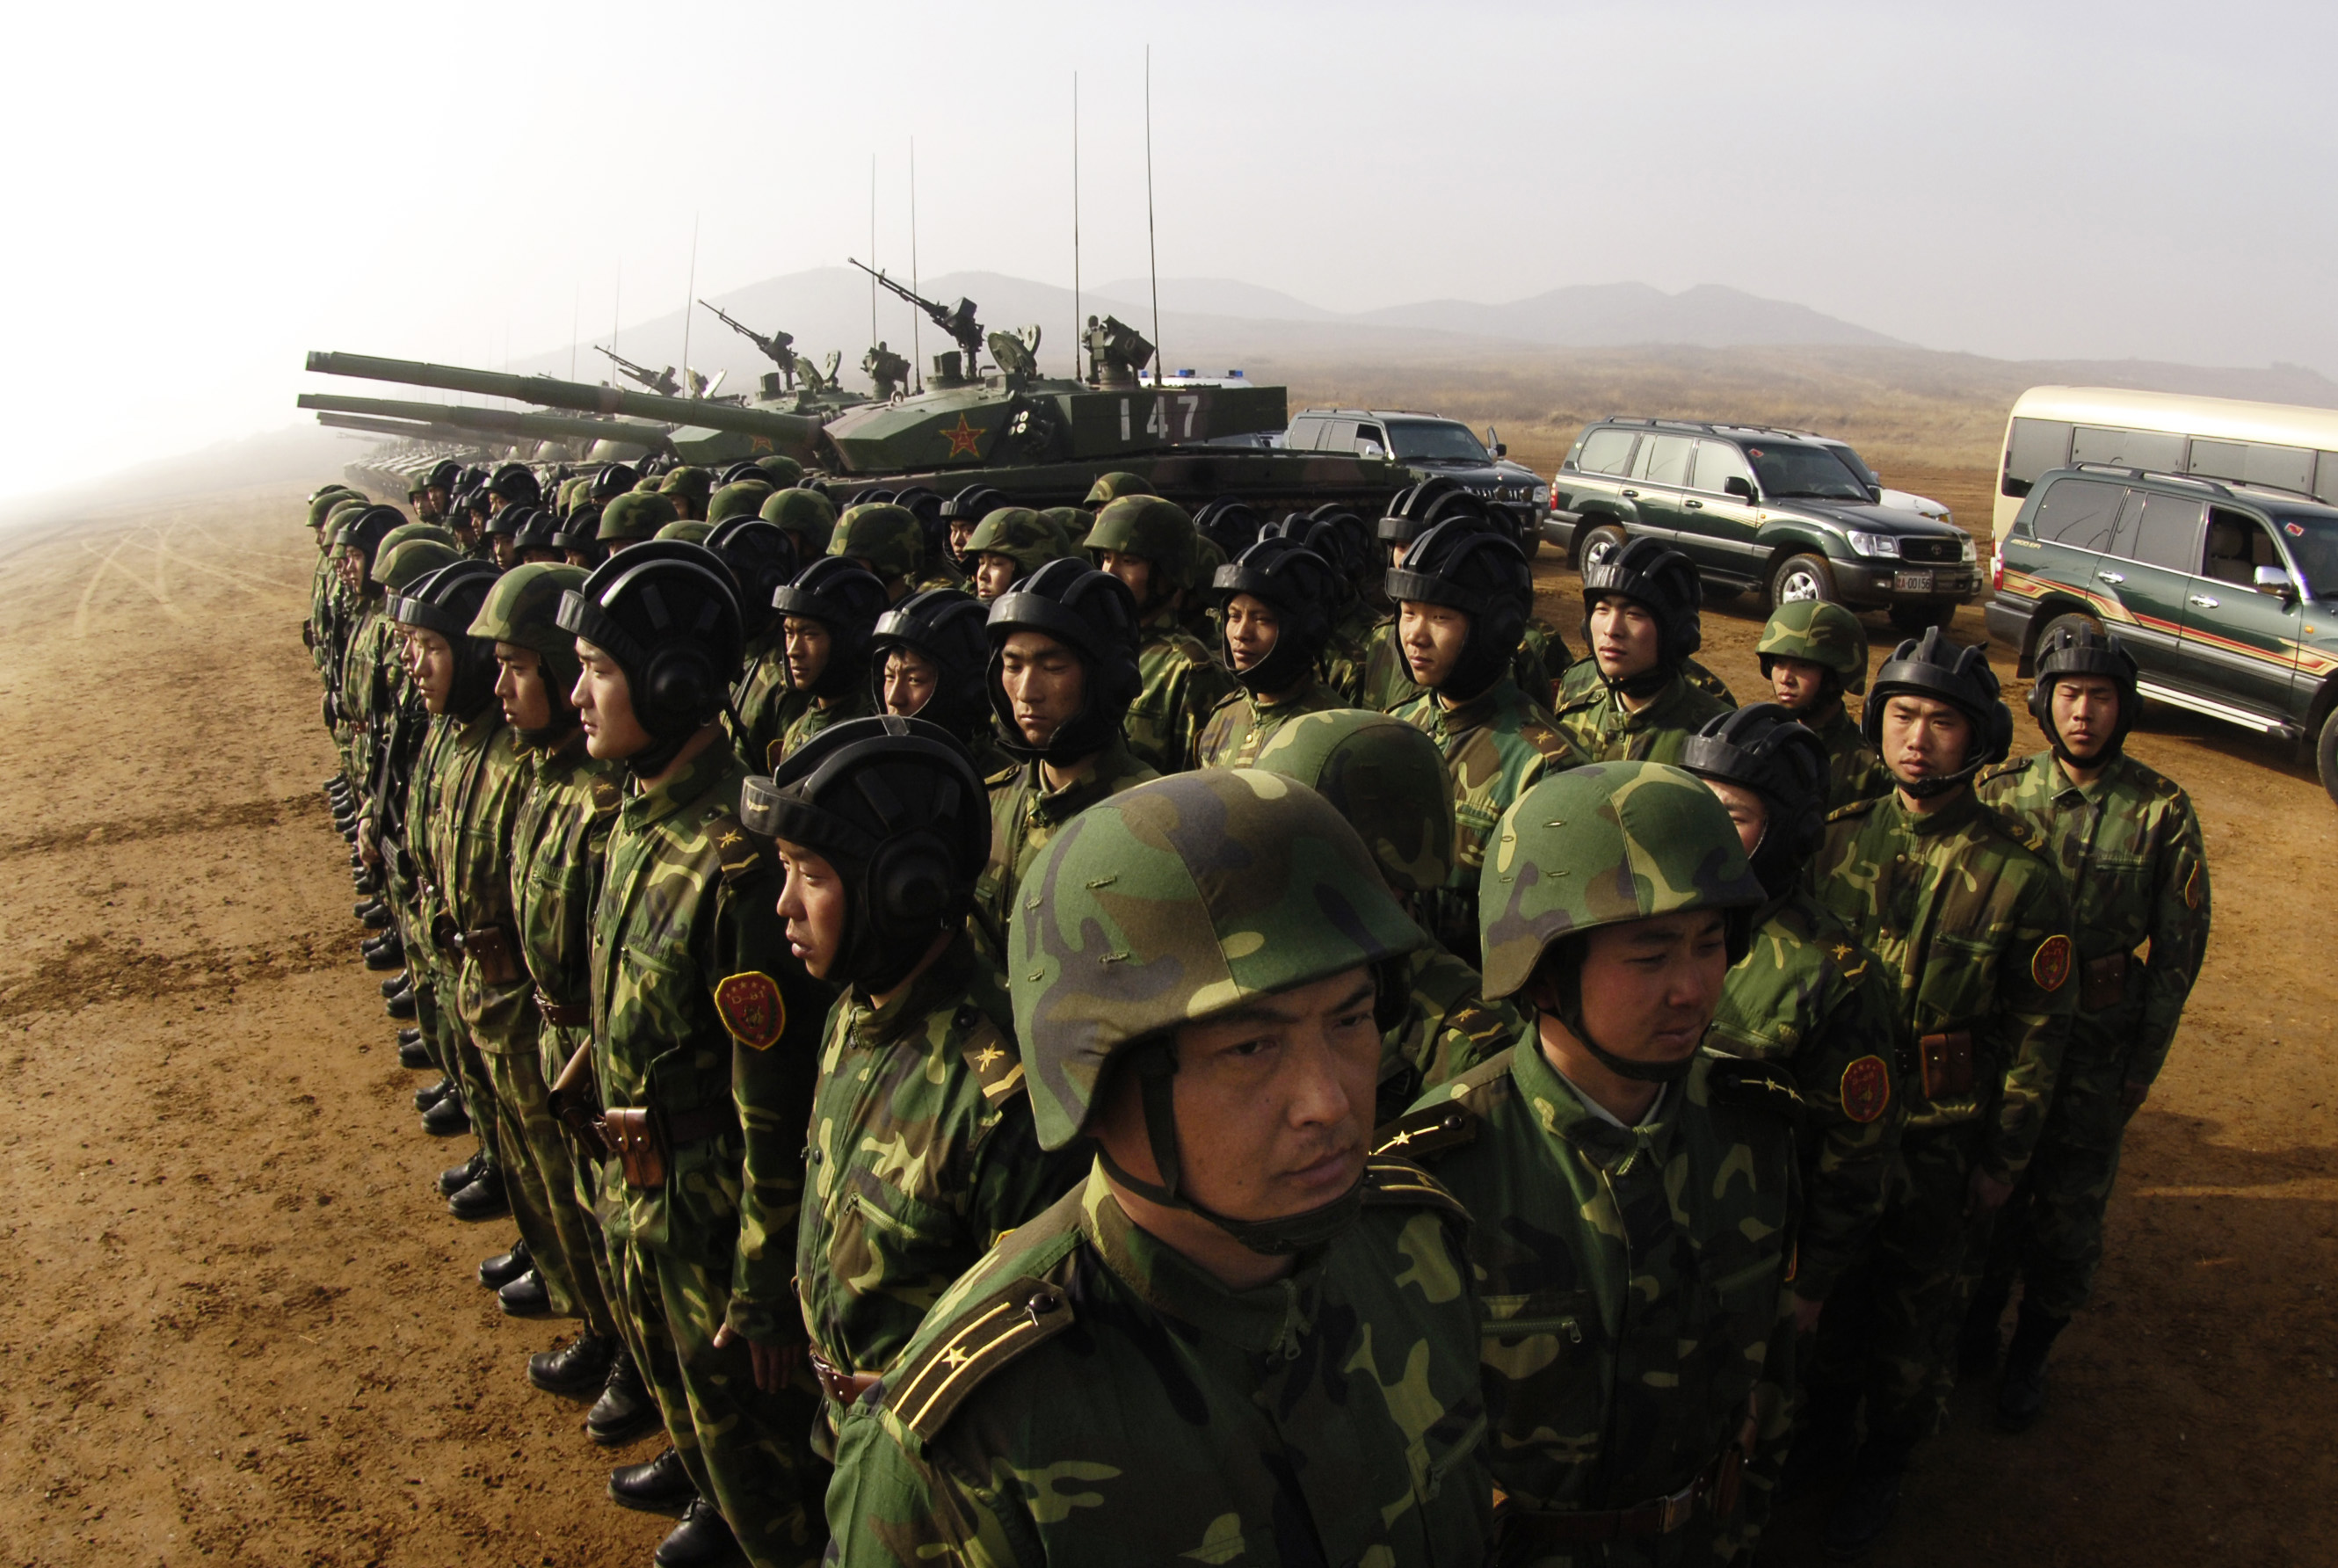 Soldiers with the People's Liberation Army at Shenyang training base in China, March 24, 2007. DoD photo by Staff Sgt. D. Myles Cullen, U.S. Air Force. (Released)